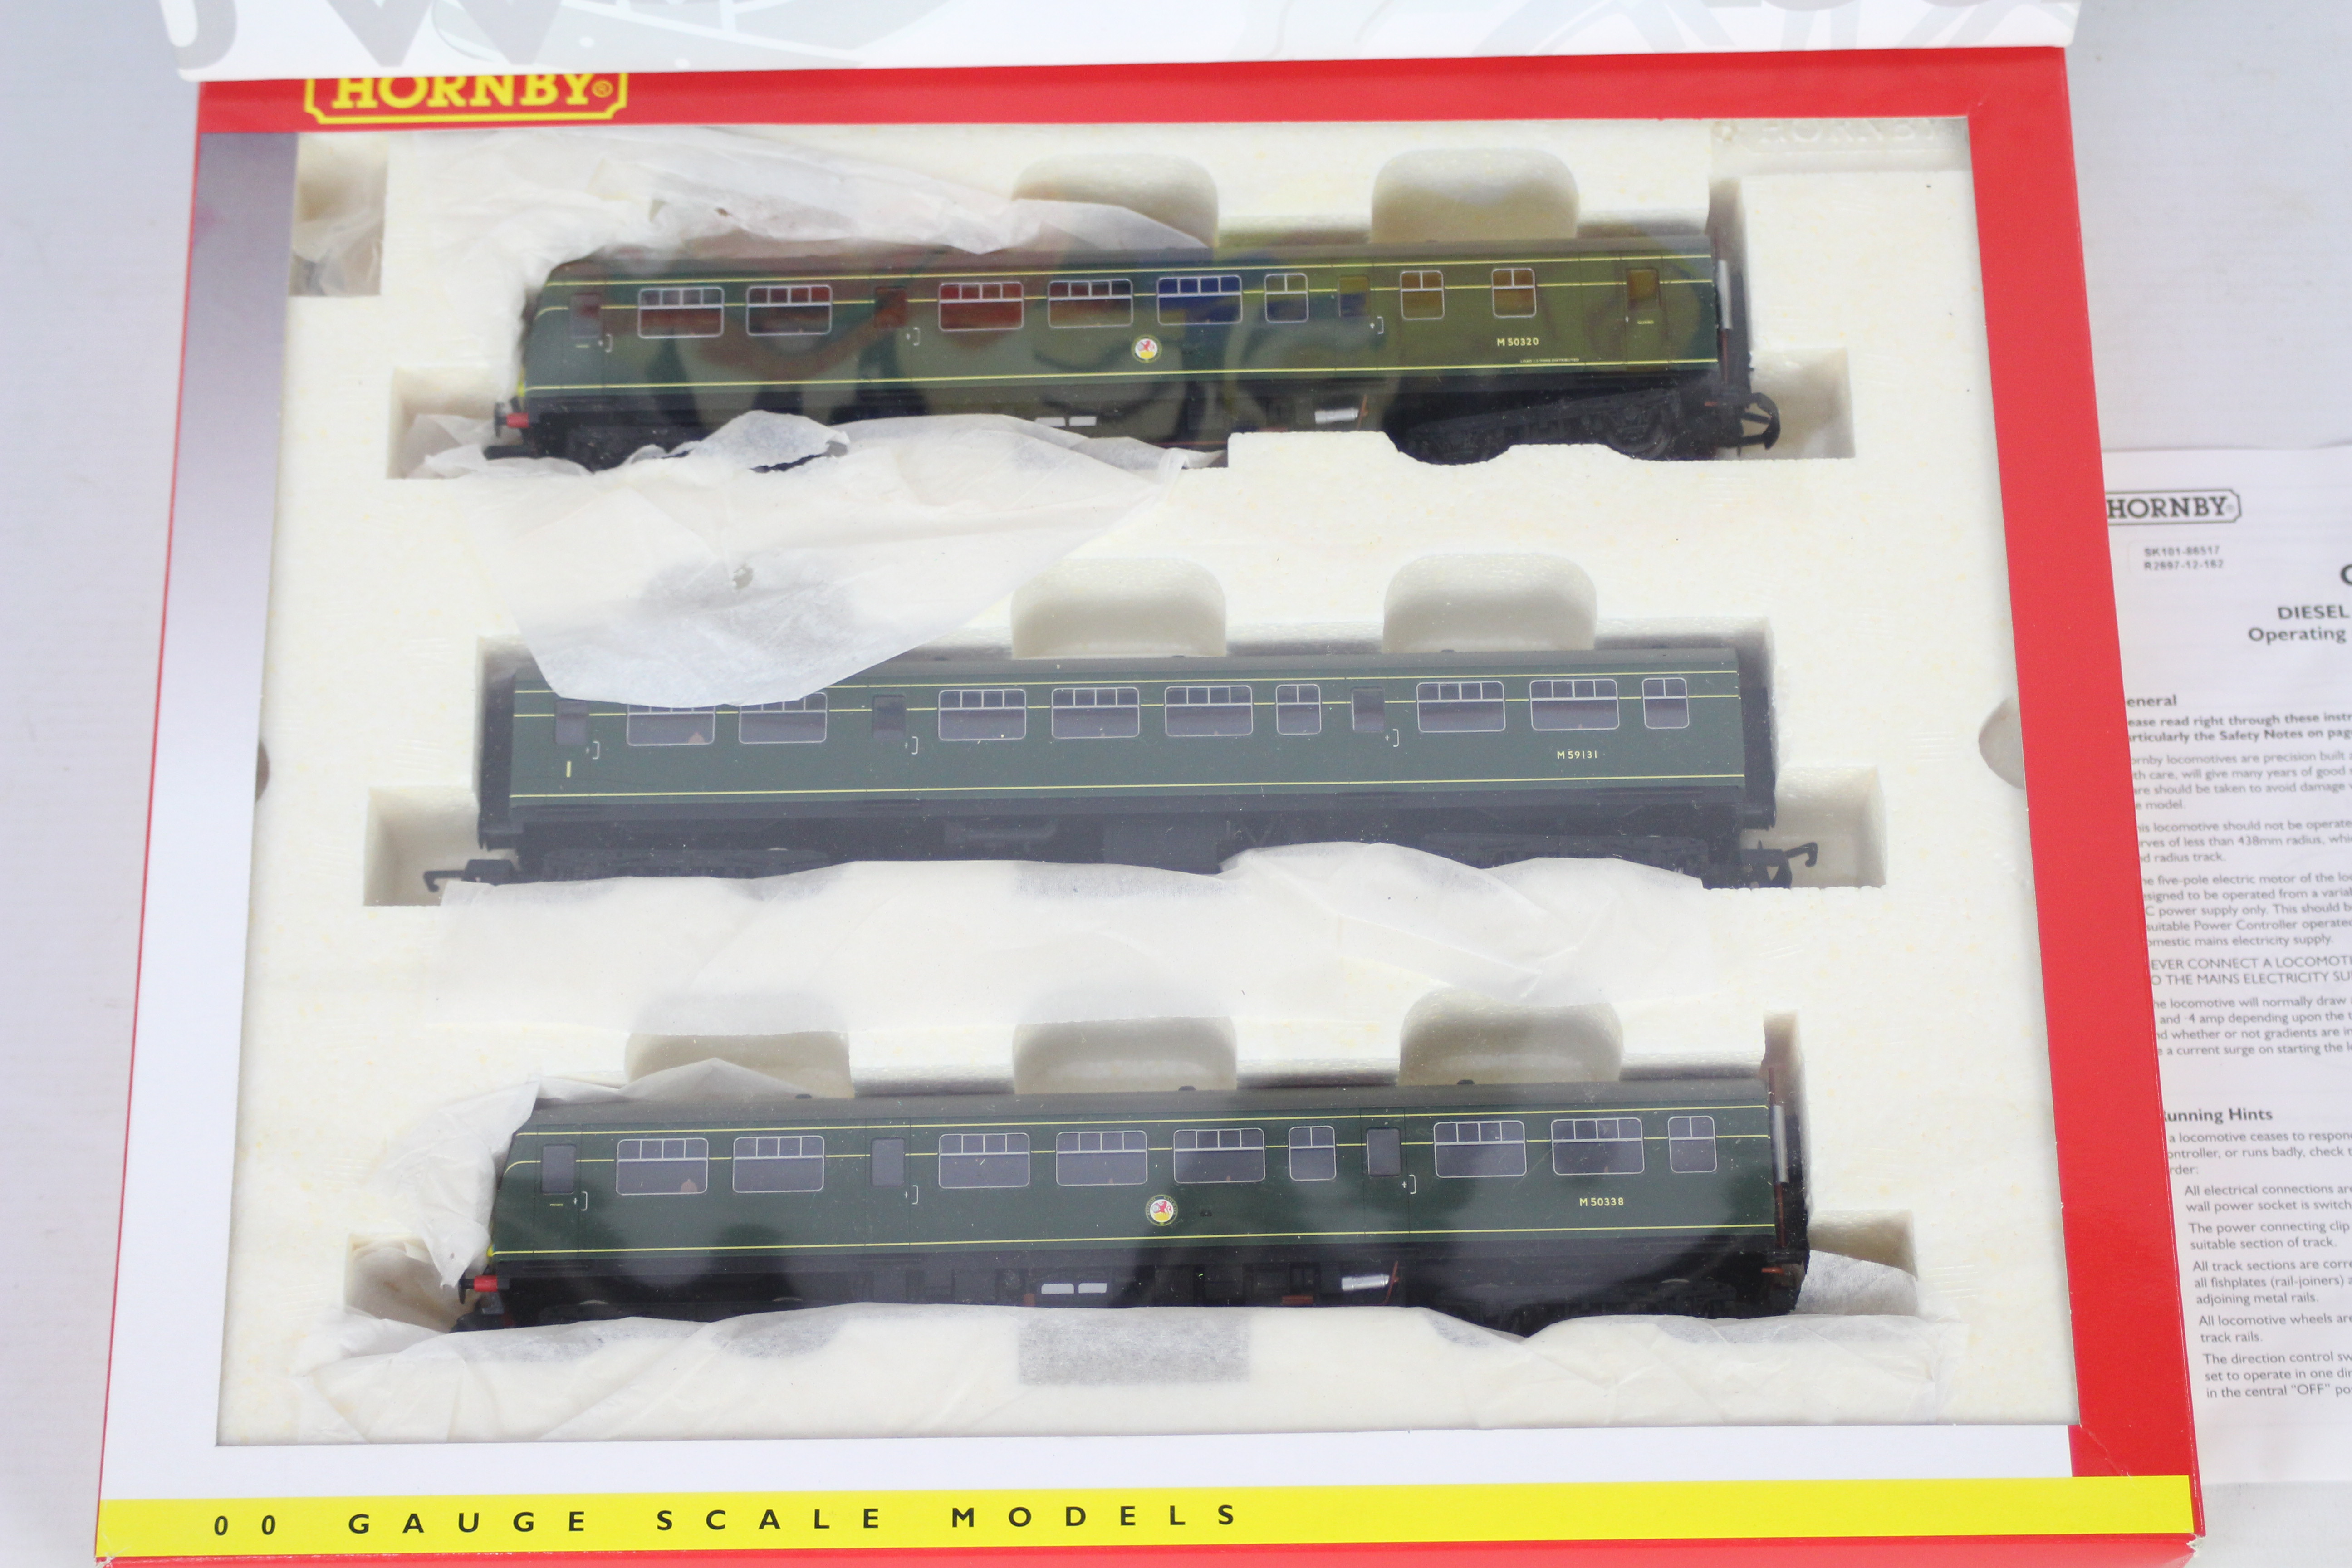 Hornby - A boxed DCC READY Hornby R2697 BR Class 101 3-Car DMU.Train Pack. - Image 2 of 2